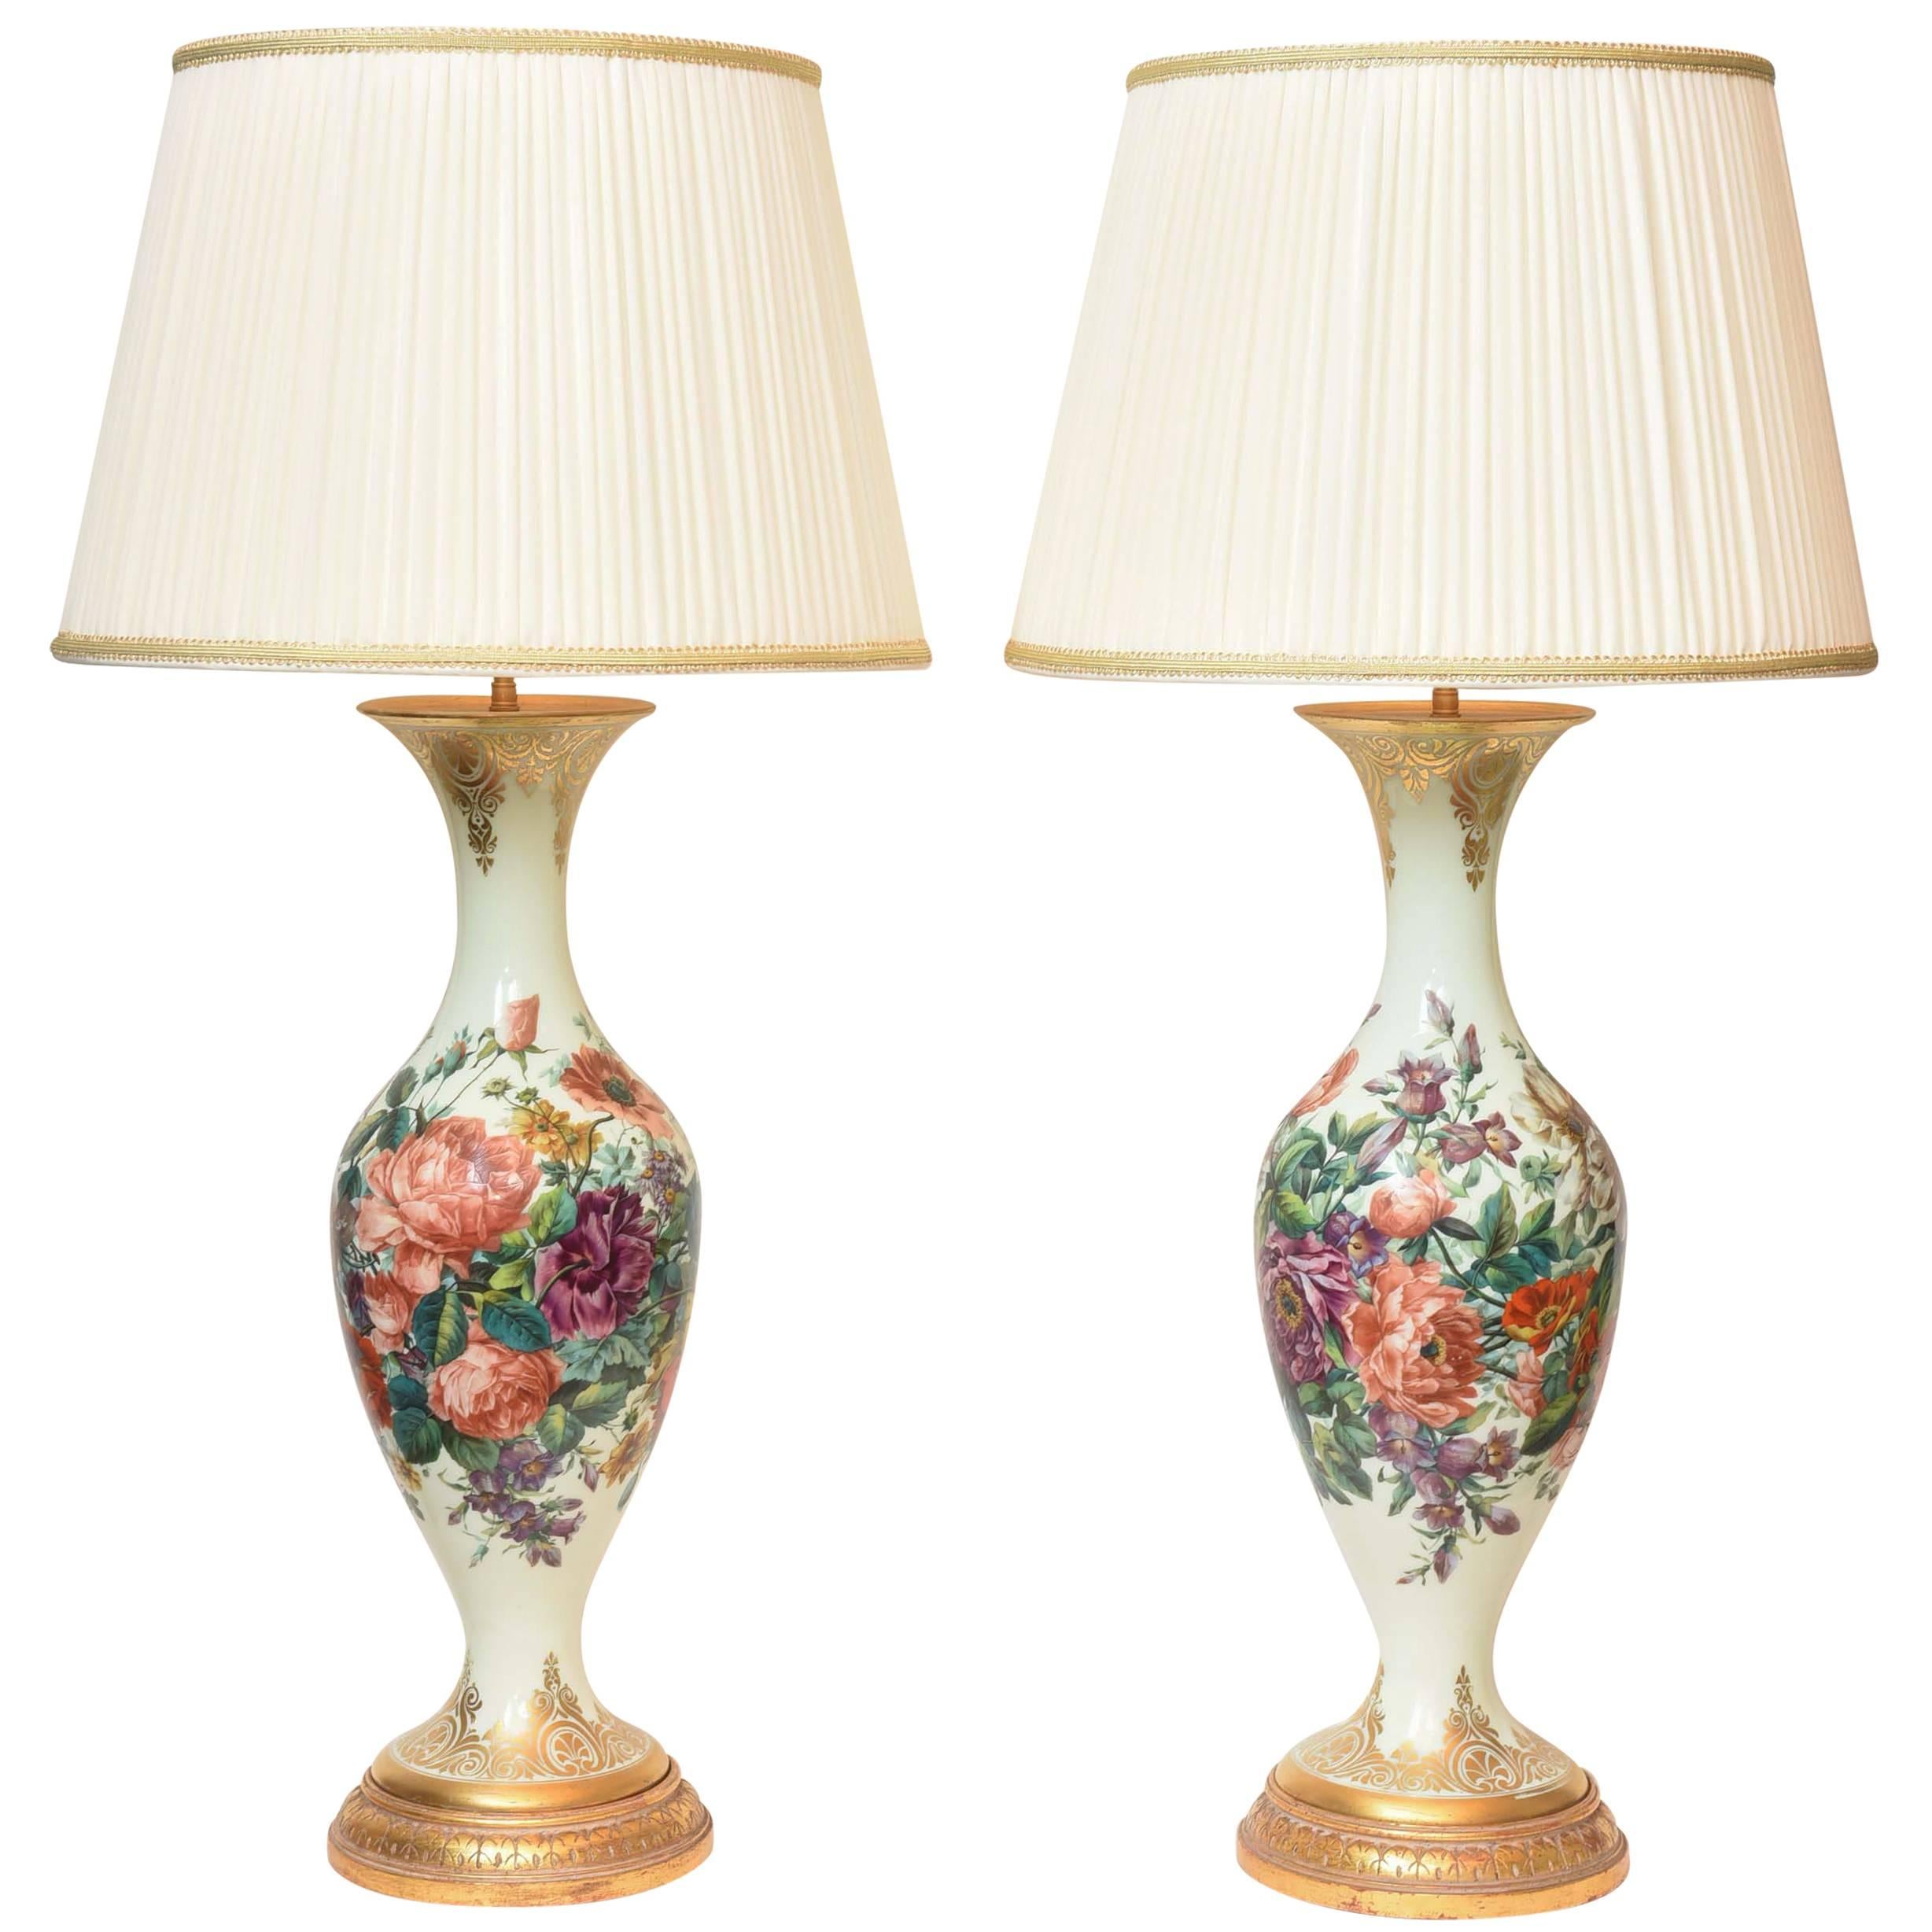 Massive Pair of 19th Century French Opaline Glass Lamps For Sale